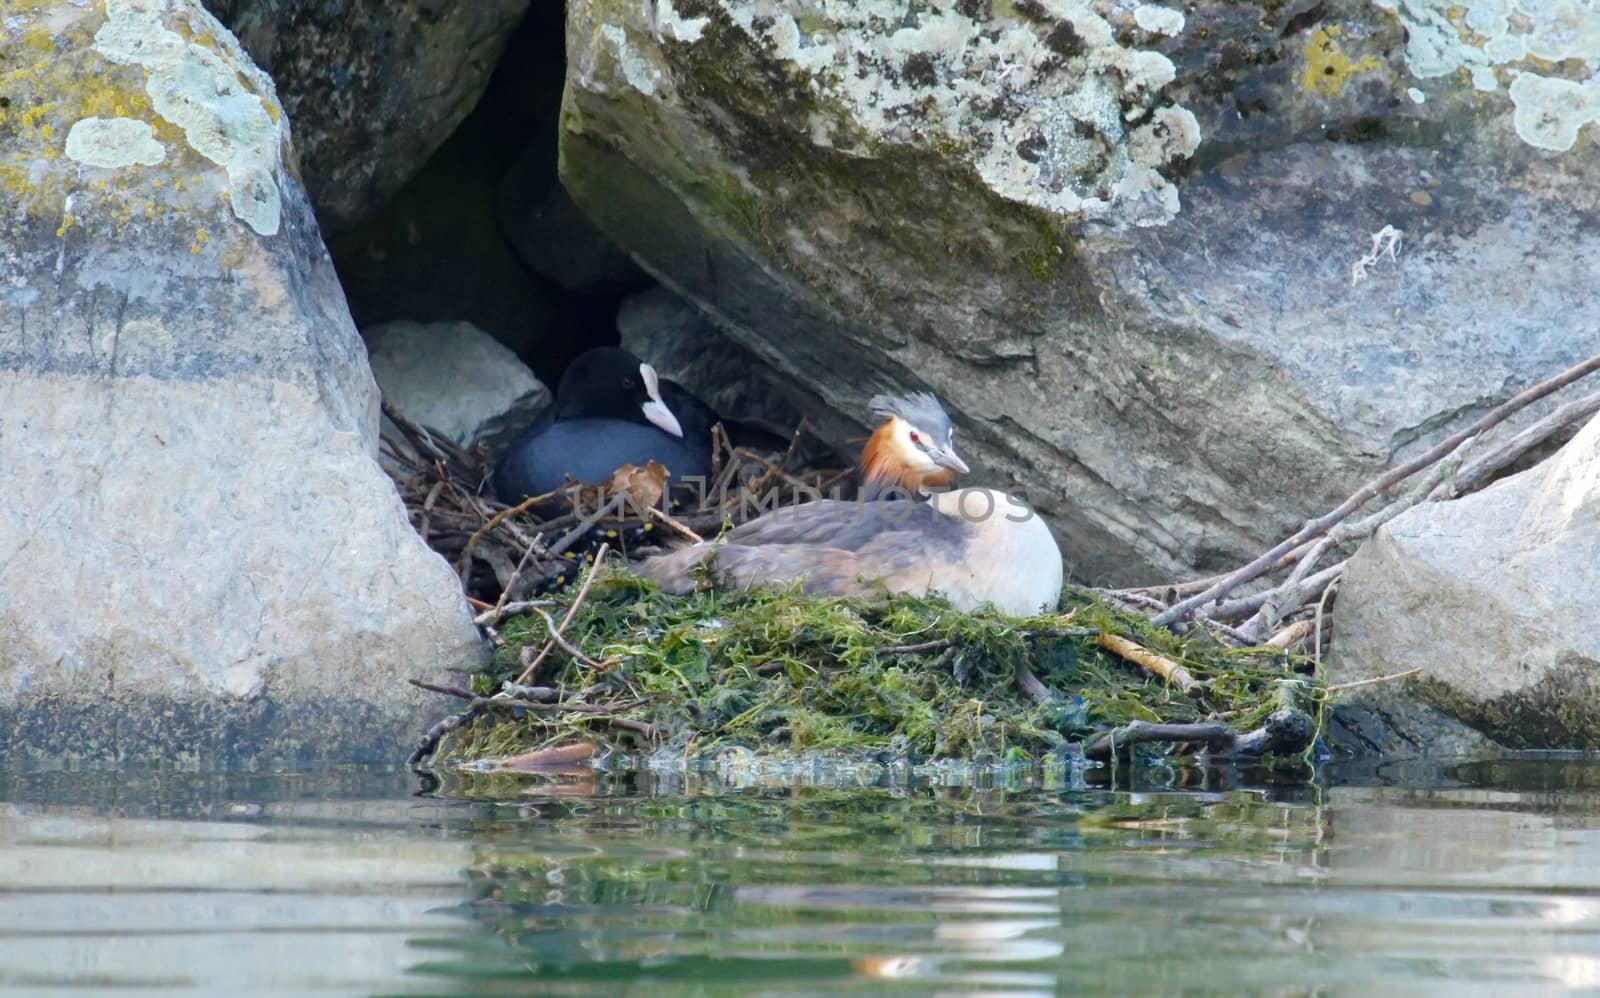 Crested grebe (podiceps cristatus) and eurasian coot (fulica atra) duck incubating their nests together in the rocks, quite rare